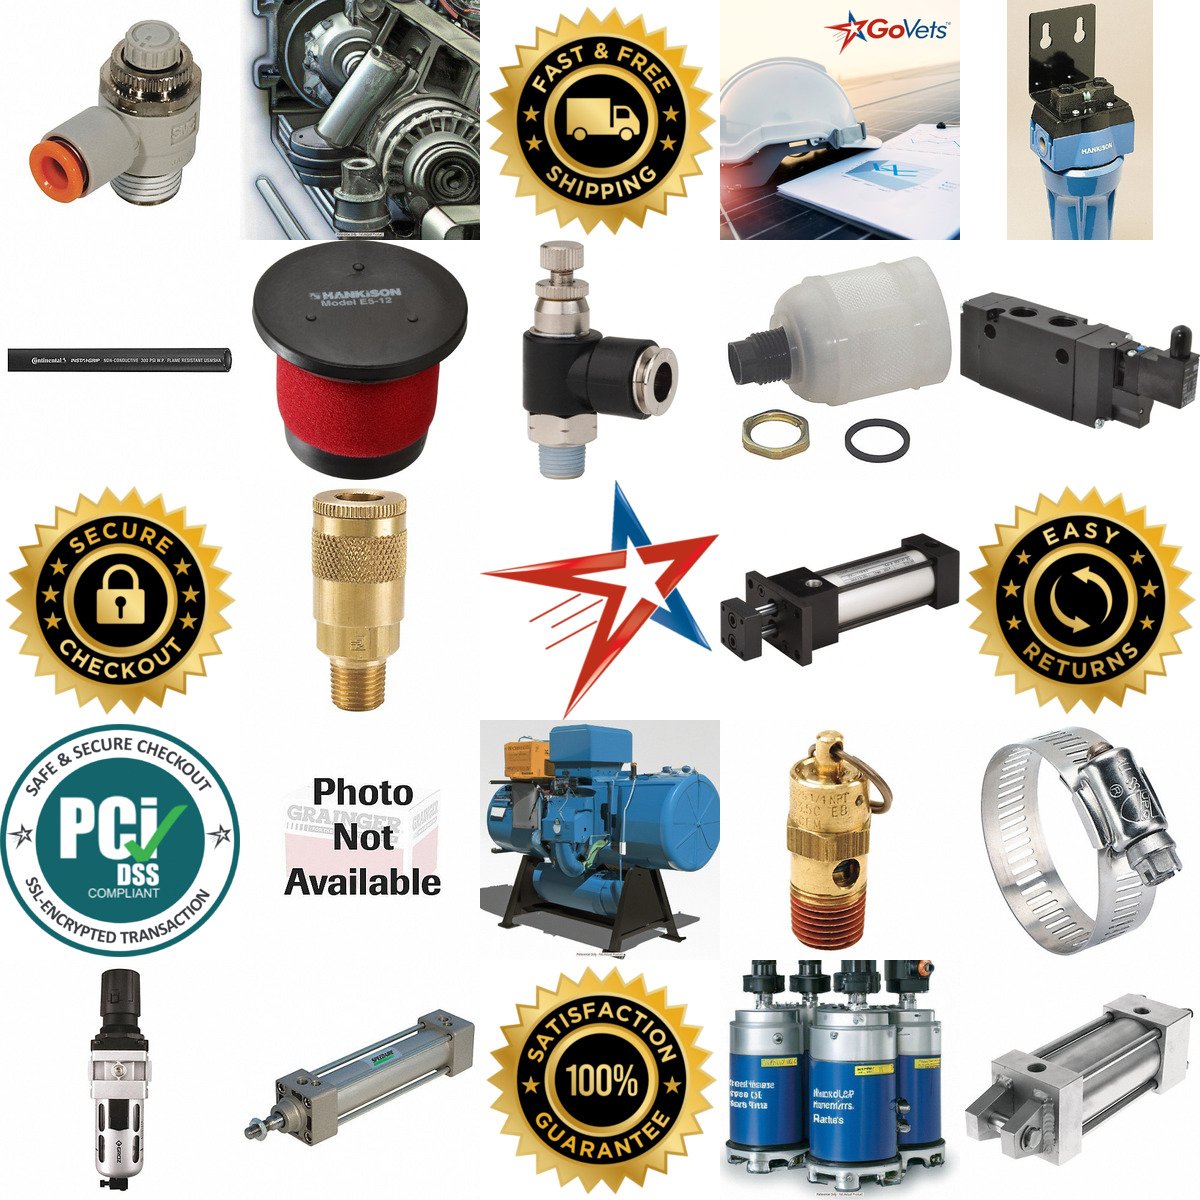 A selection of Pneumatics products on GoVets